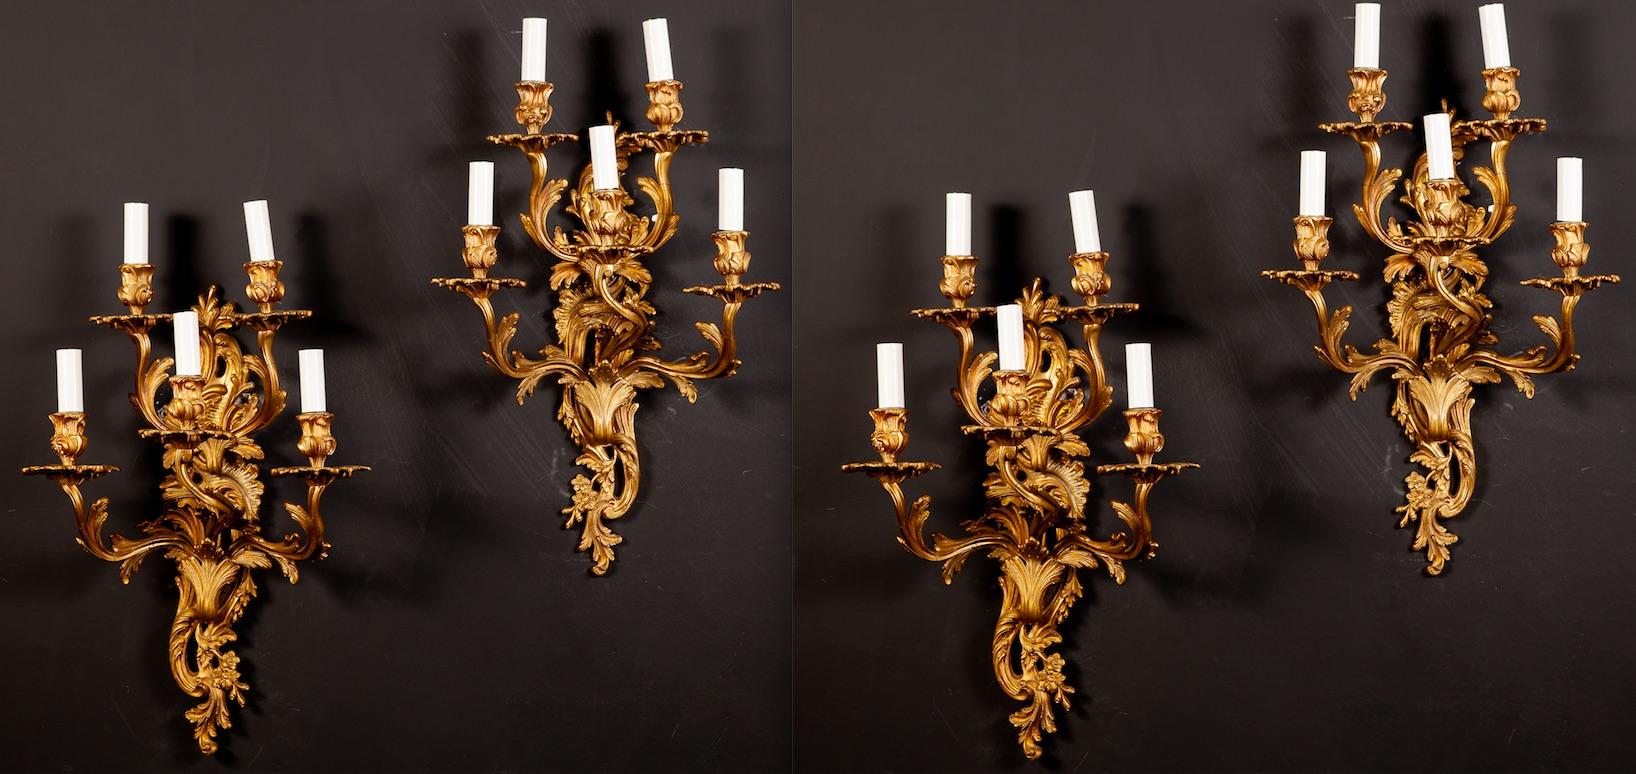 Pair of 19th Century Louis XV Style Gilt Bronze Five Arms French Sconces, 1890s (Louis XV.)